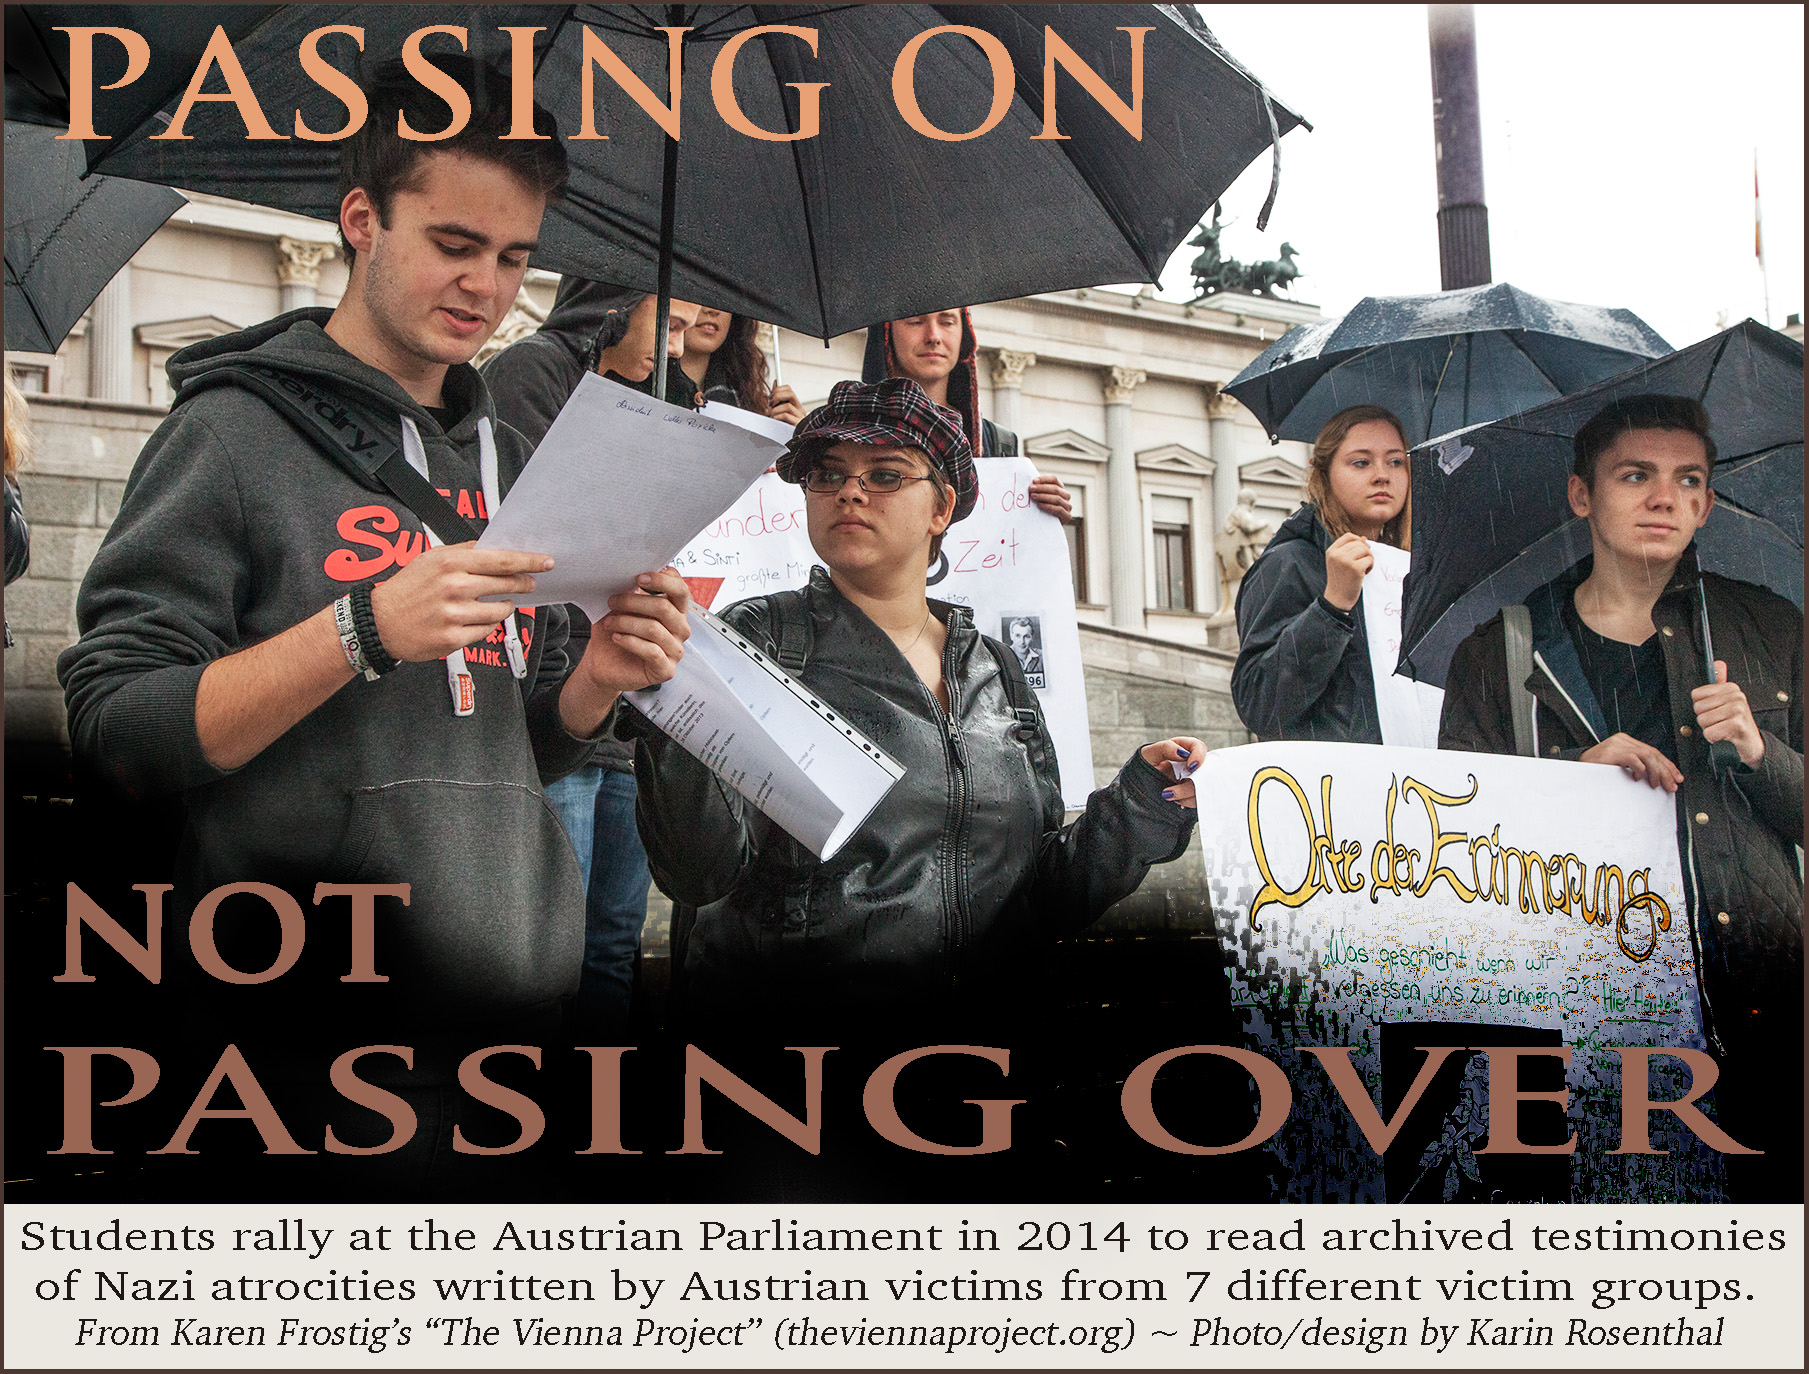 Students standing in front of the Austrian Parliament in the rain, several holding umbrellas, reading from papers